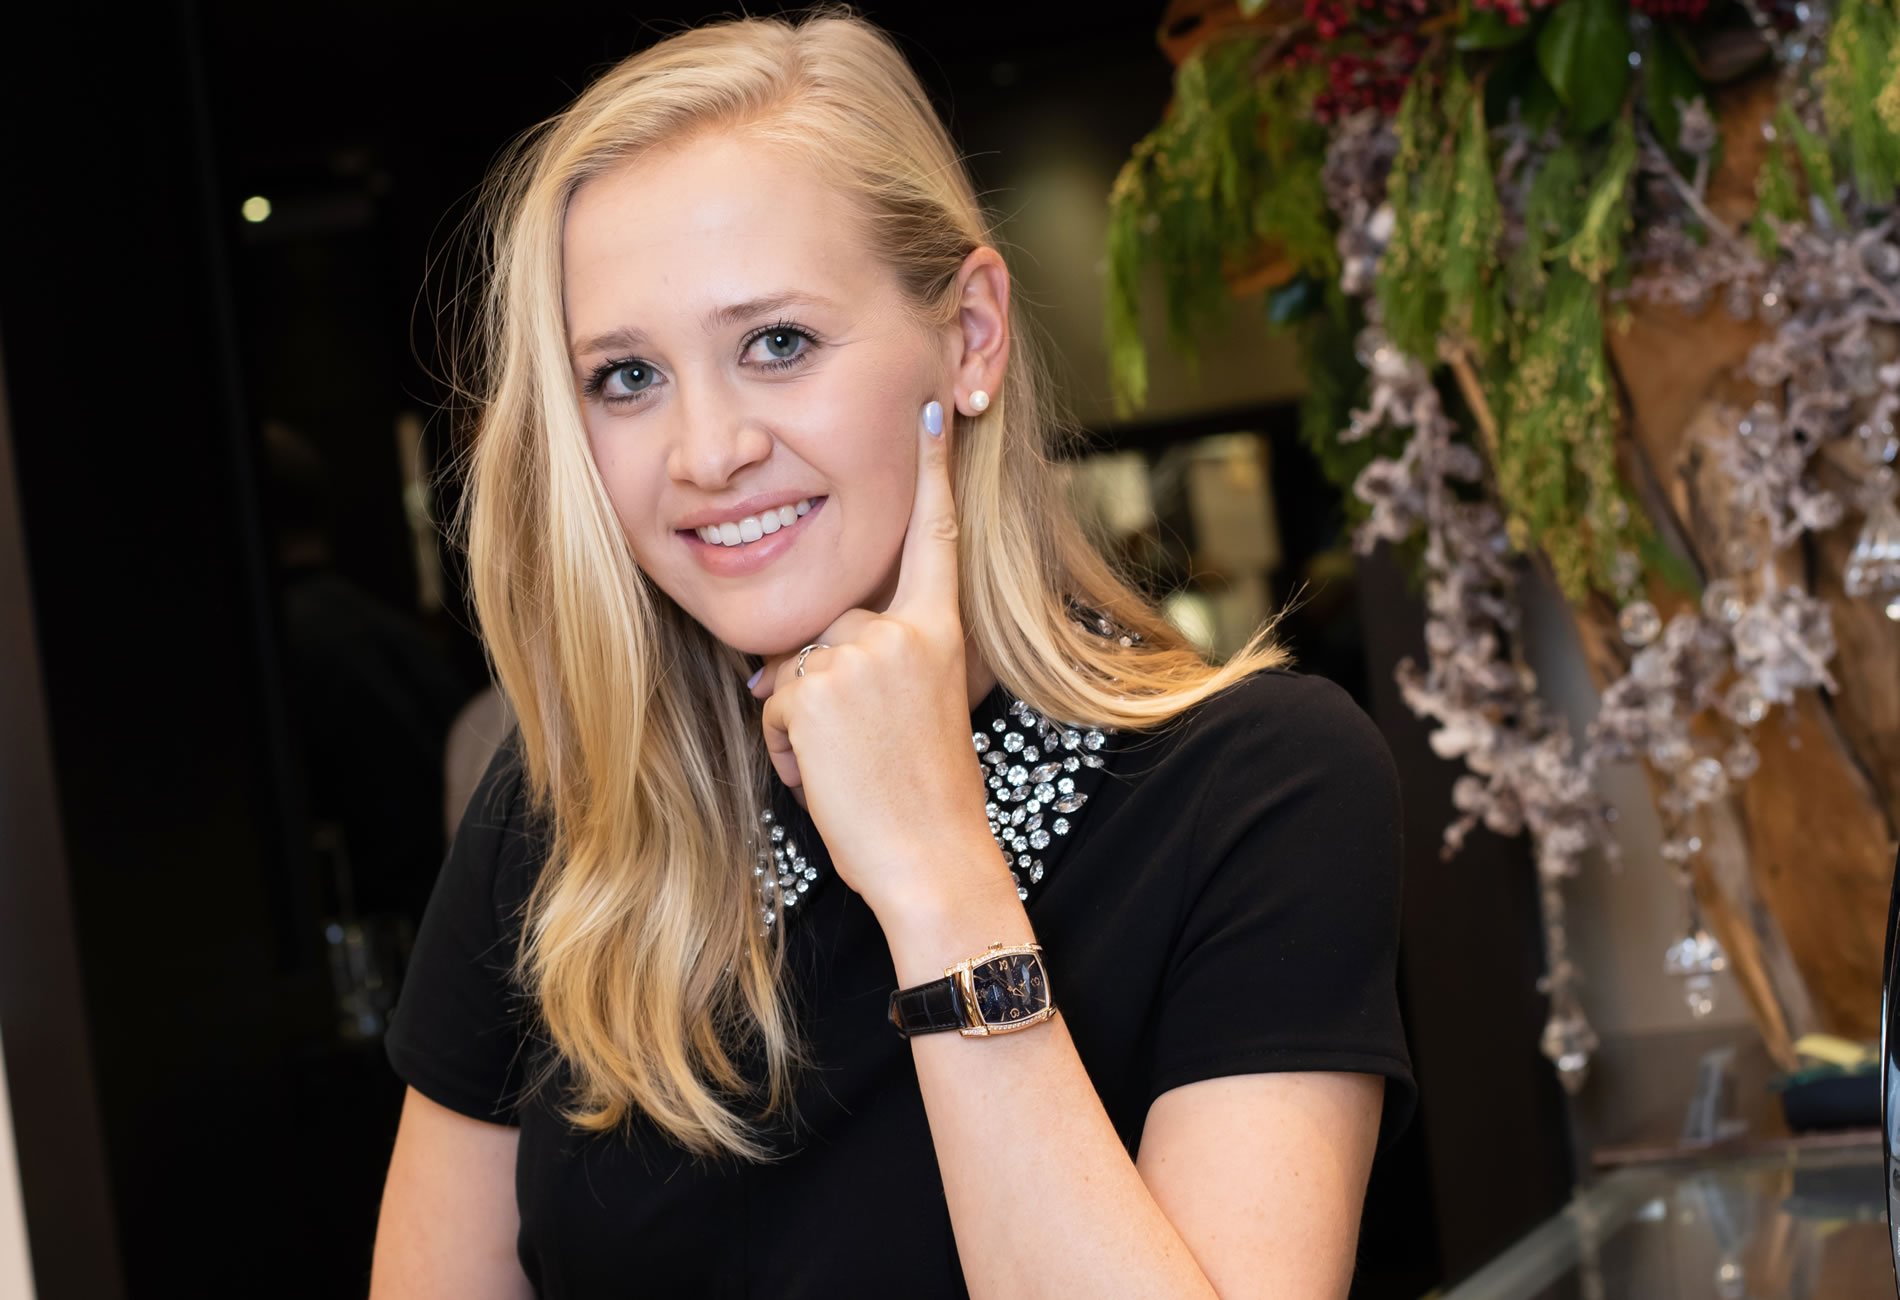 Parmigiani Fleurier is delighted to announce new Friend of the Brand: Professional golfer Jessica Korda